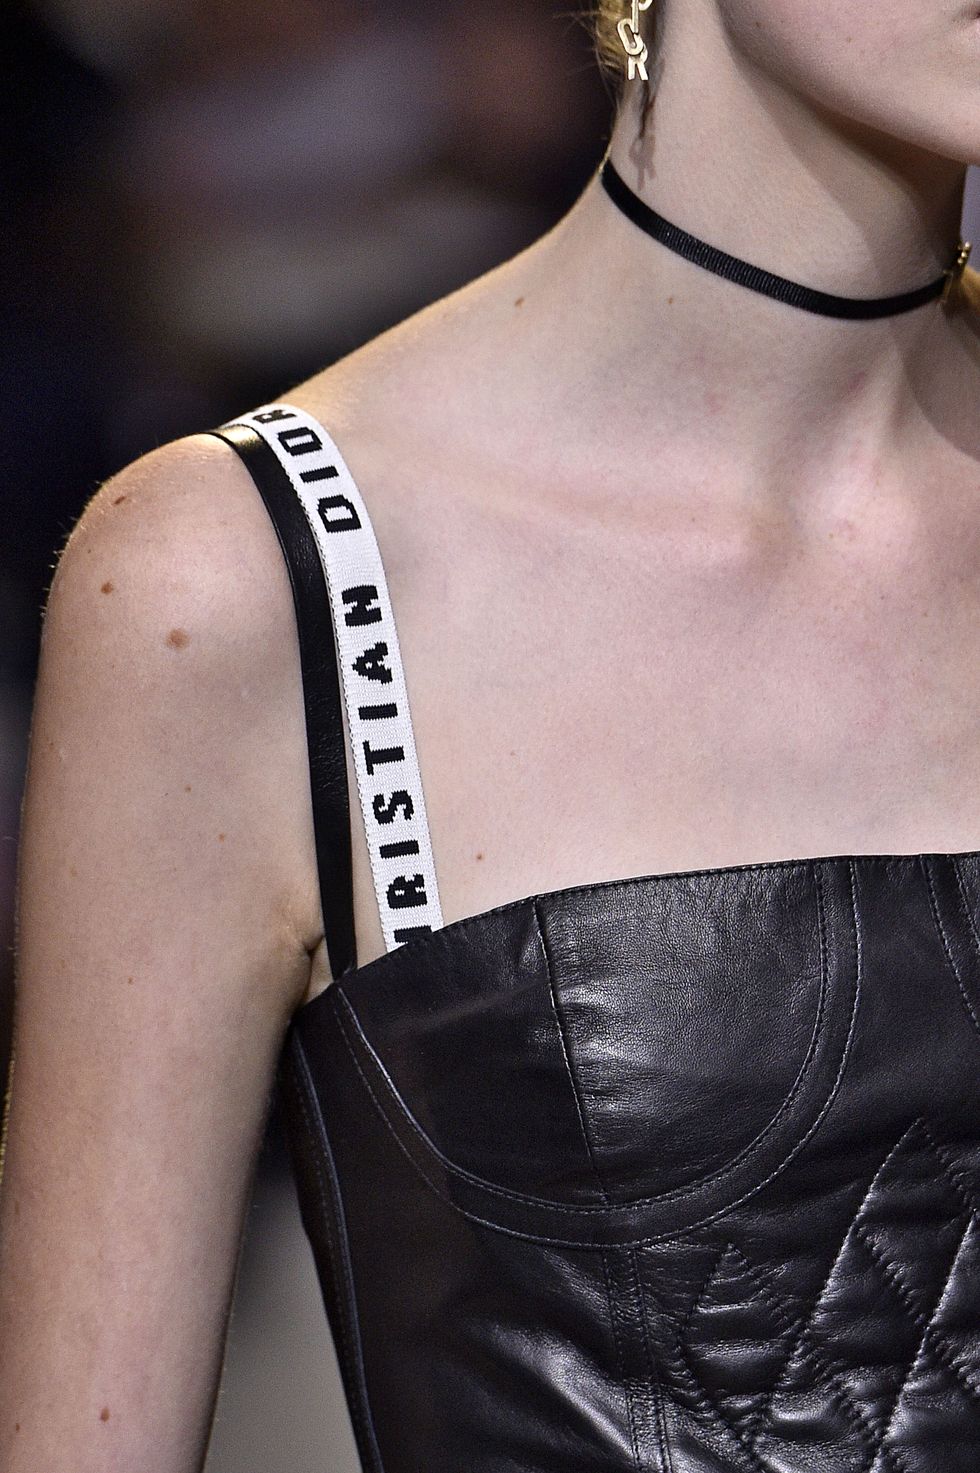 <p>We might not be quite ready for this trend,&nbsp;but Maria Grazia Churi, creative director of Christian Dior, makes a good case. In her premiere collection for the Parisian house, bold bra straps were layered under corseted dresses in a&nbsp;throwback to the mid-aughts.&nbsp;<a href="http://24.media.tumblr.com/9d092c575d87e5f727eb4ec1590c82a4/tumblr_mium0cy6oc1qgbguro1_r1_250.gif" target="_blank" data-tracking-id="recirc-text-link">Contrast straps</a> are about to make a fierce comeback.&nbsp;<span class="redactor-invisible-space" data-verified="redactor" data-redactor-tag="span" data-redactor-class="redactor-invisible-space"></span></p>